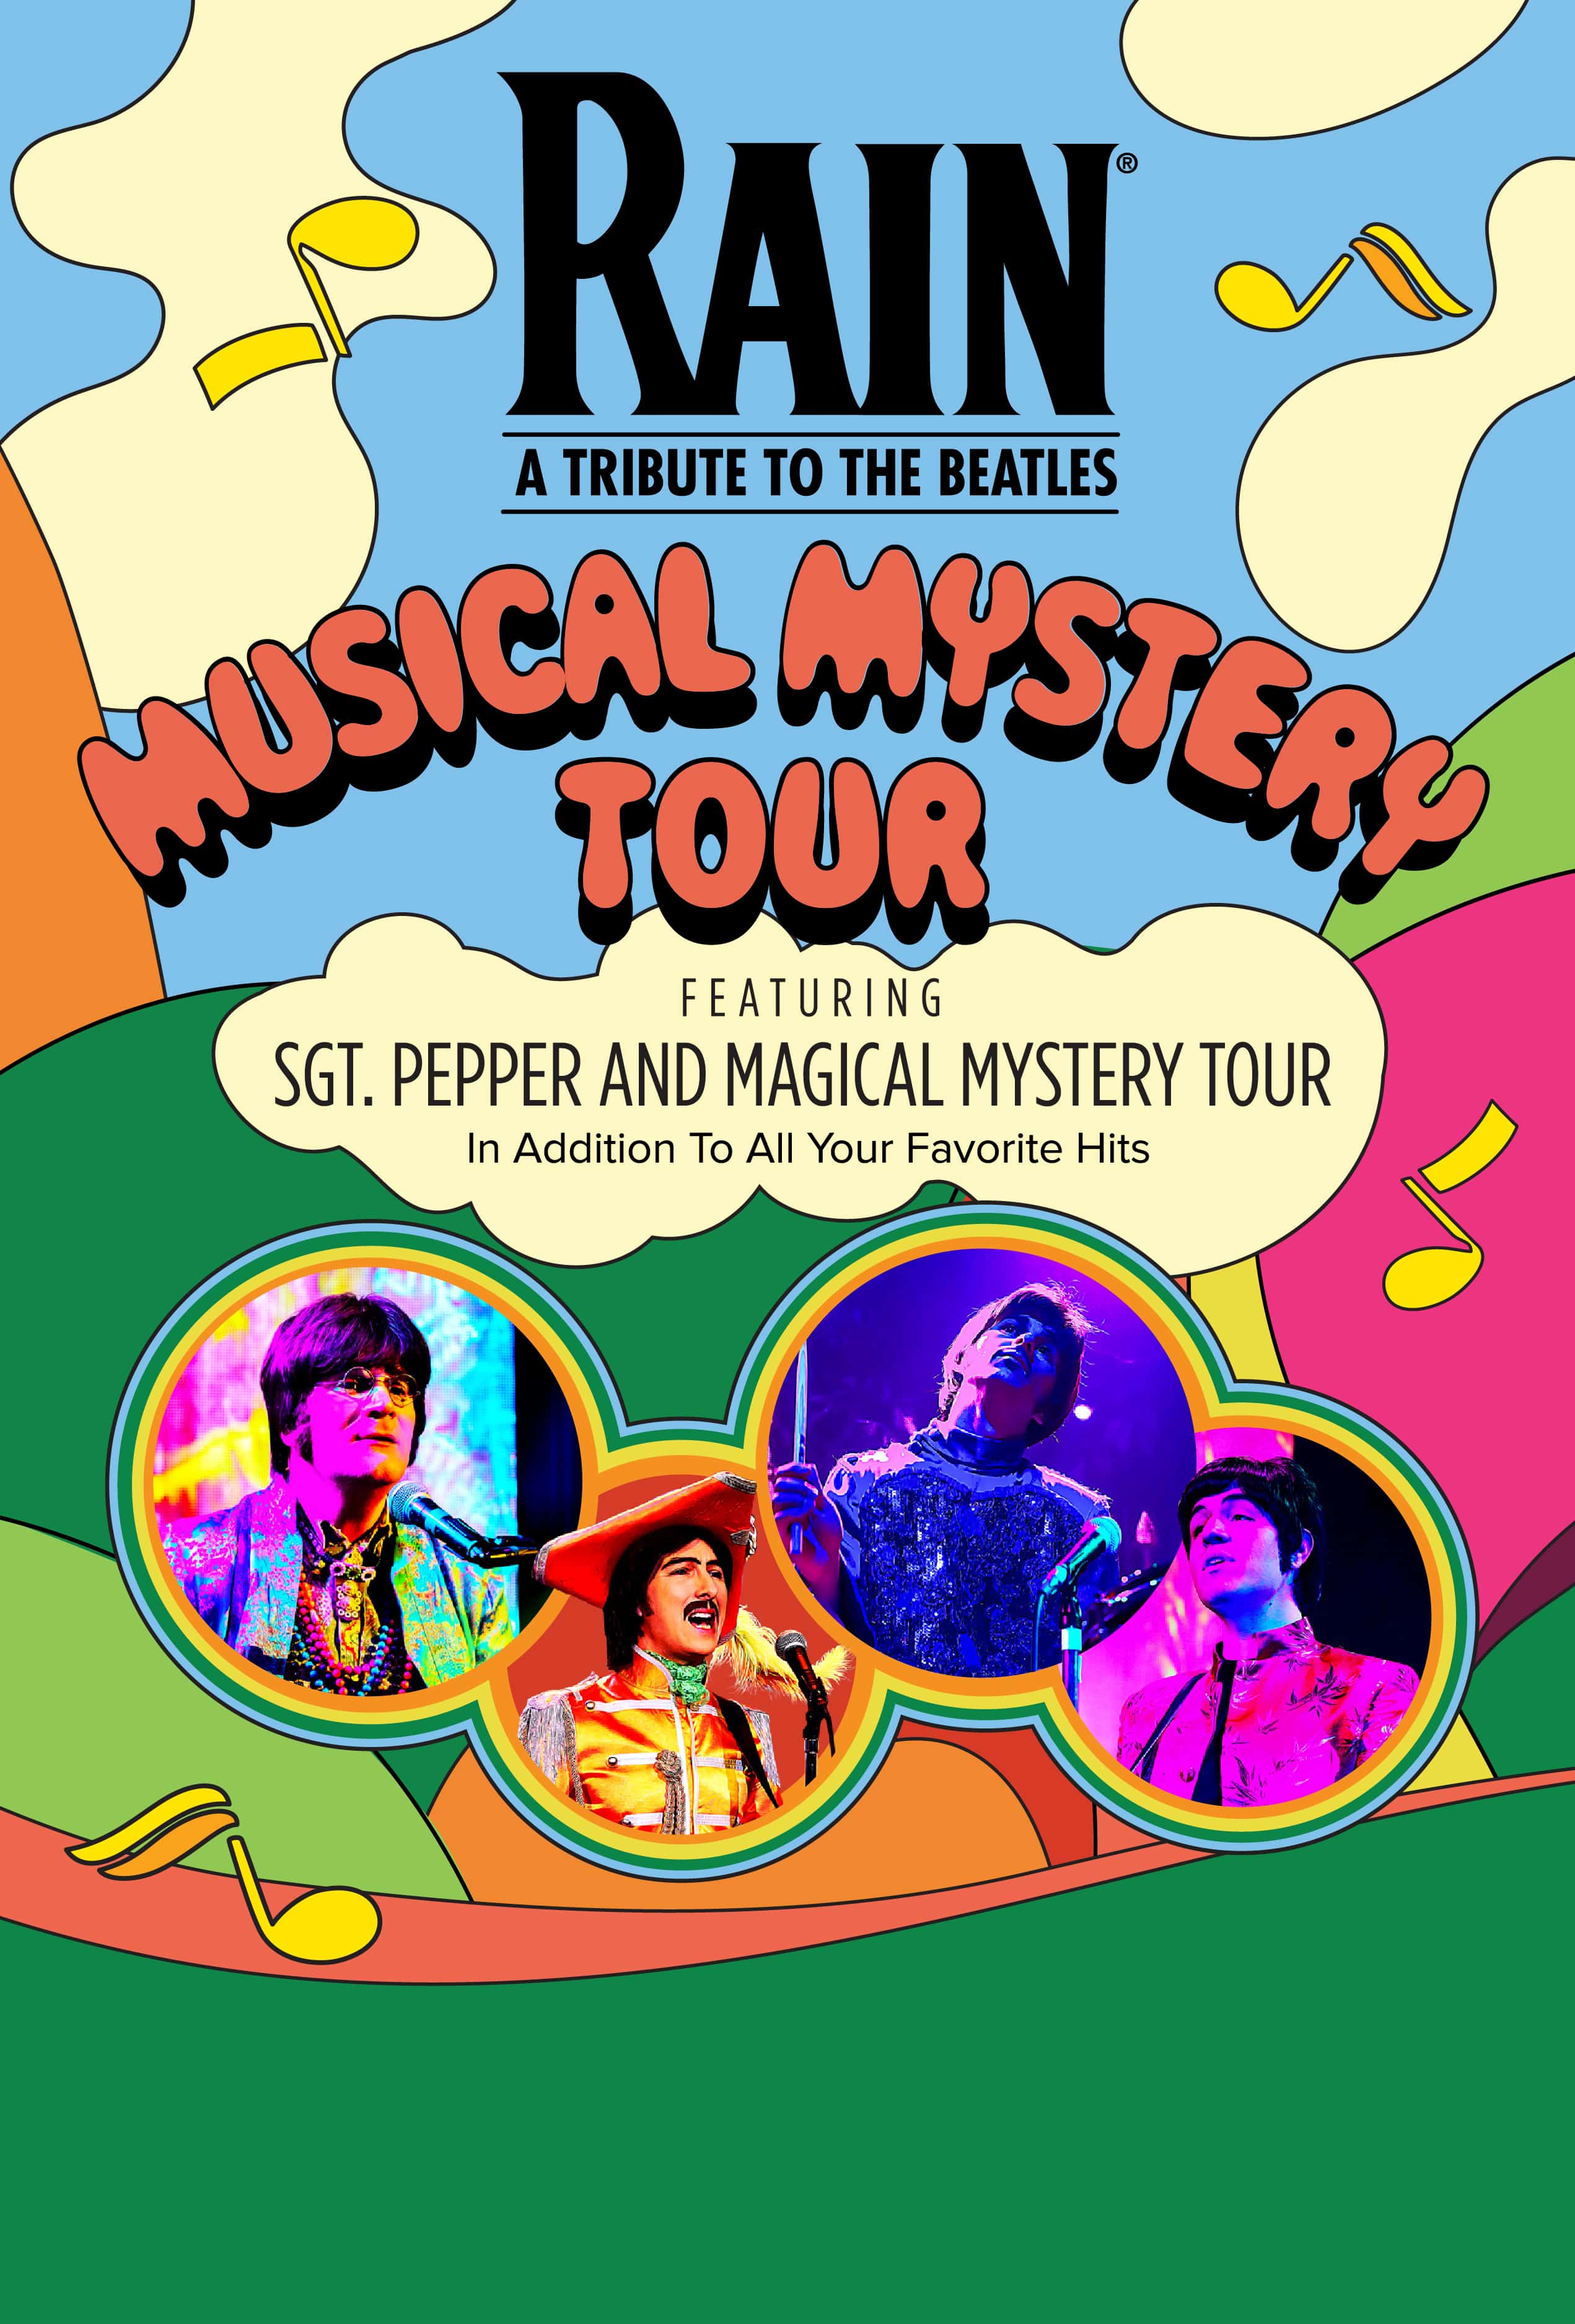 RAIN – A TRIBUTE TO THE BEATLES: MUSICAL MYSTERY TOUR